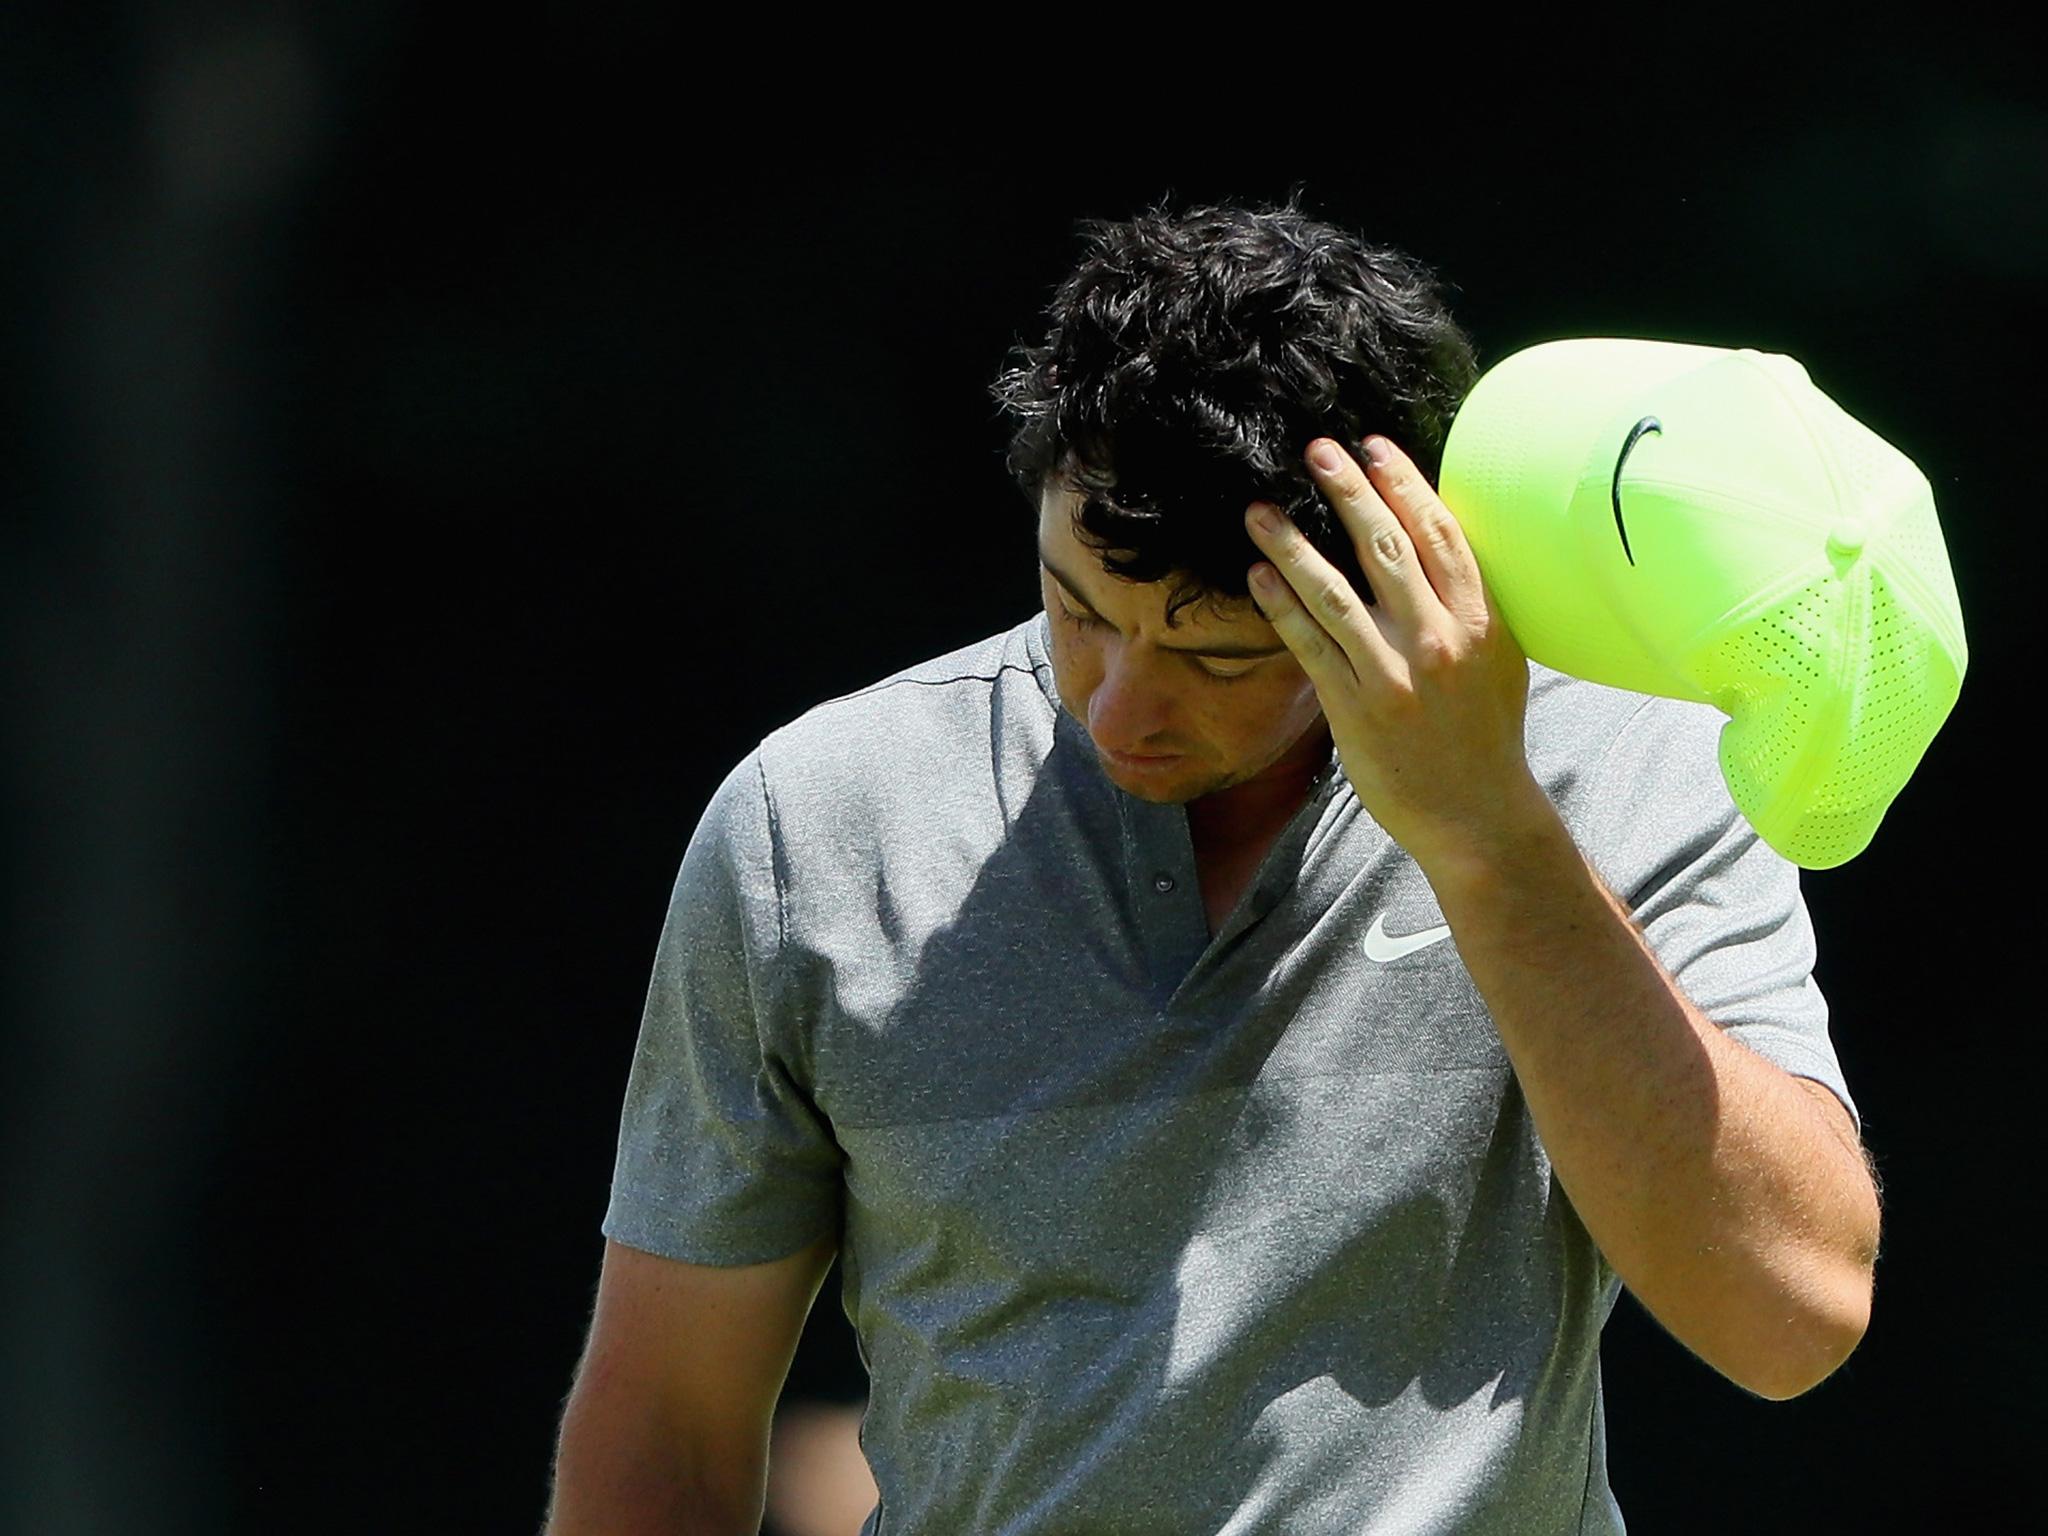 McIlroy missed his first cut in a major championship since the 2013 Open at Muirfield